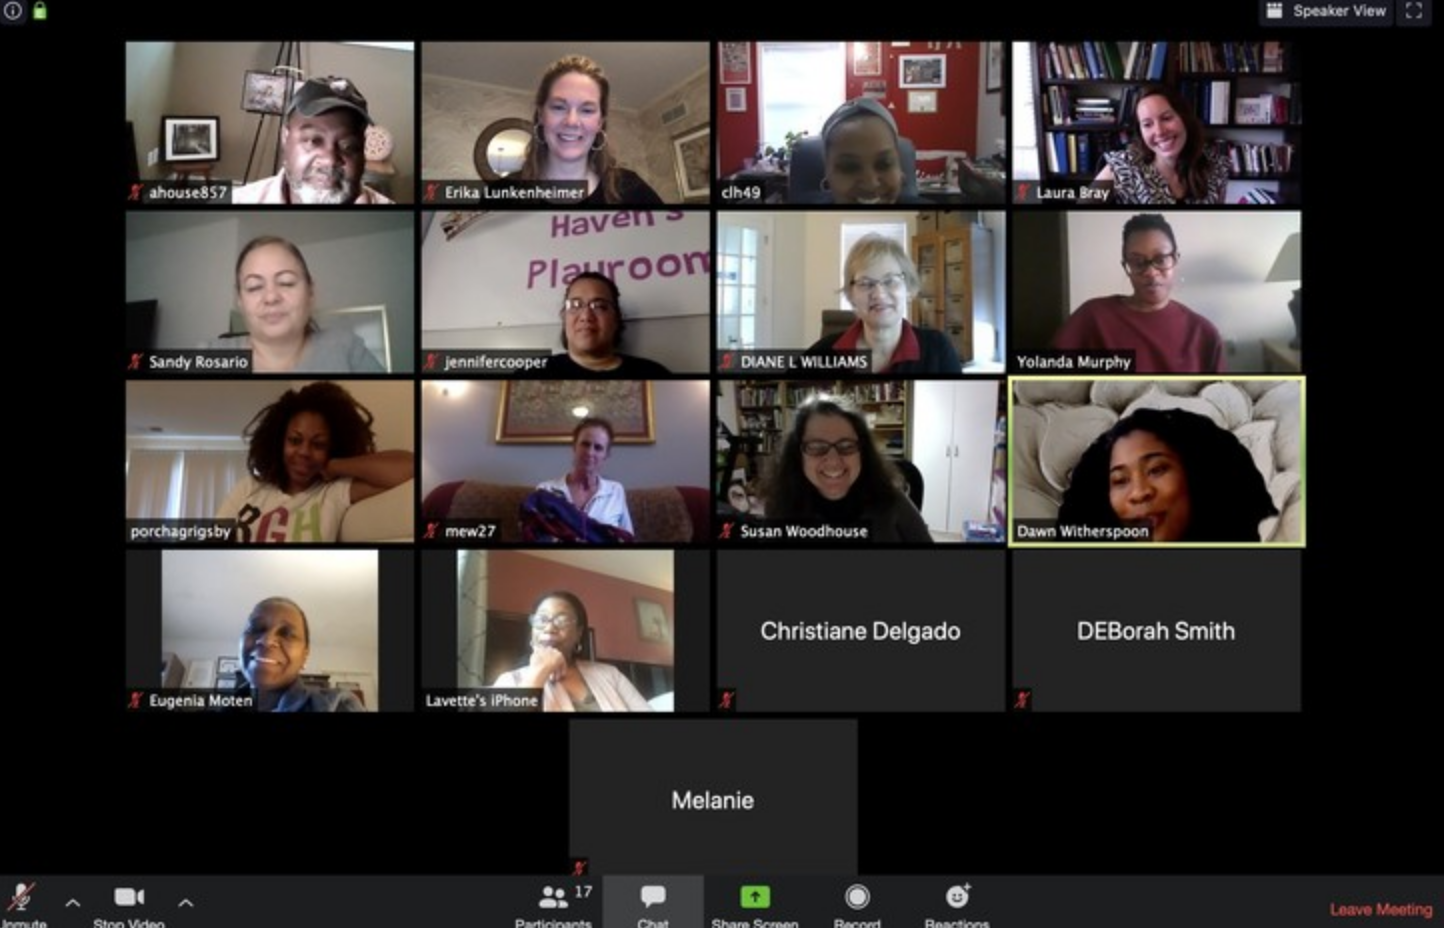 Members of the PACT Community Advisory Board held their first virtual monthly meeting in April 2020.